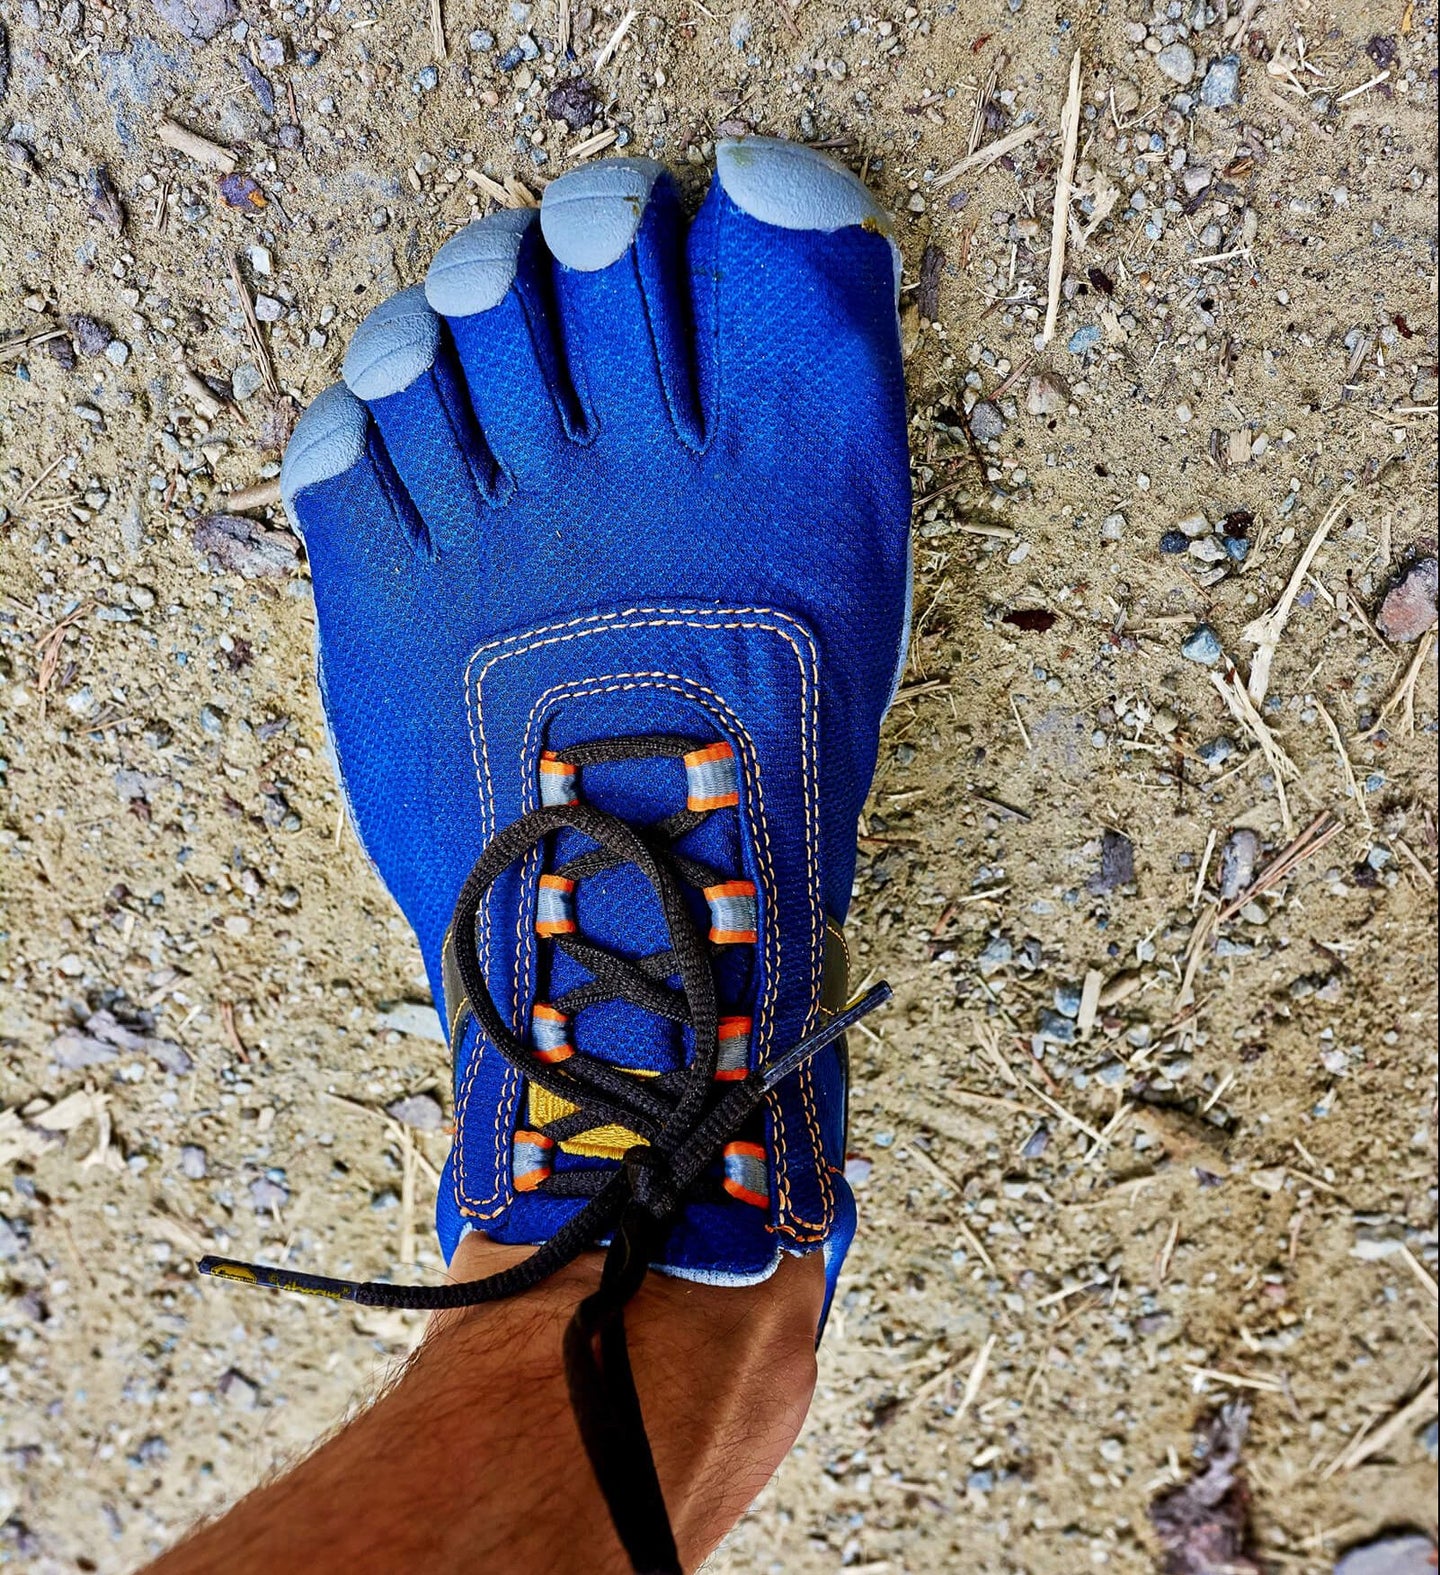 Best Barefoot Shoes: The Closest Thing to Walking Barefoot